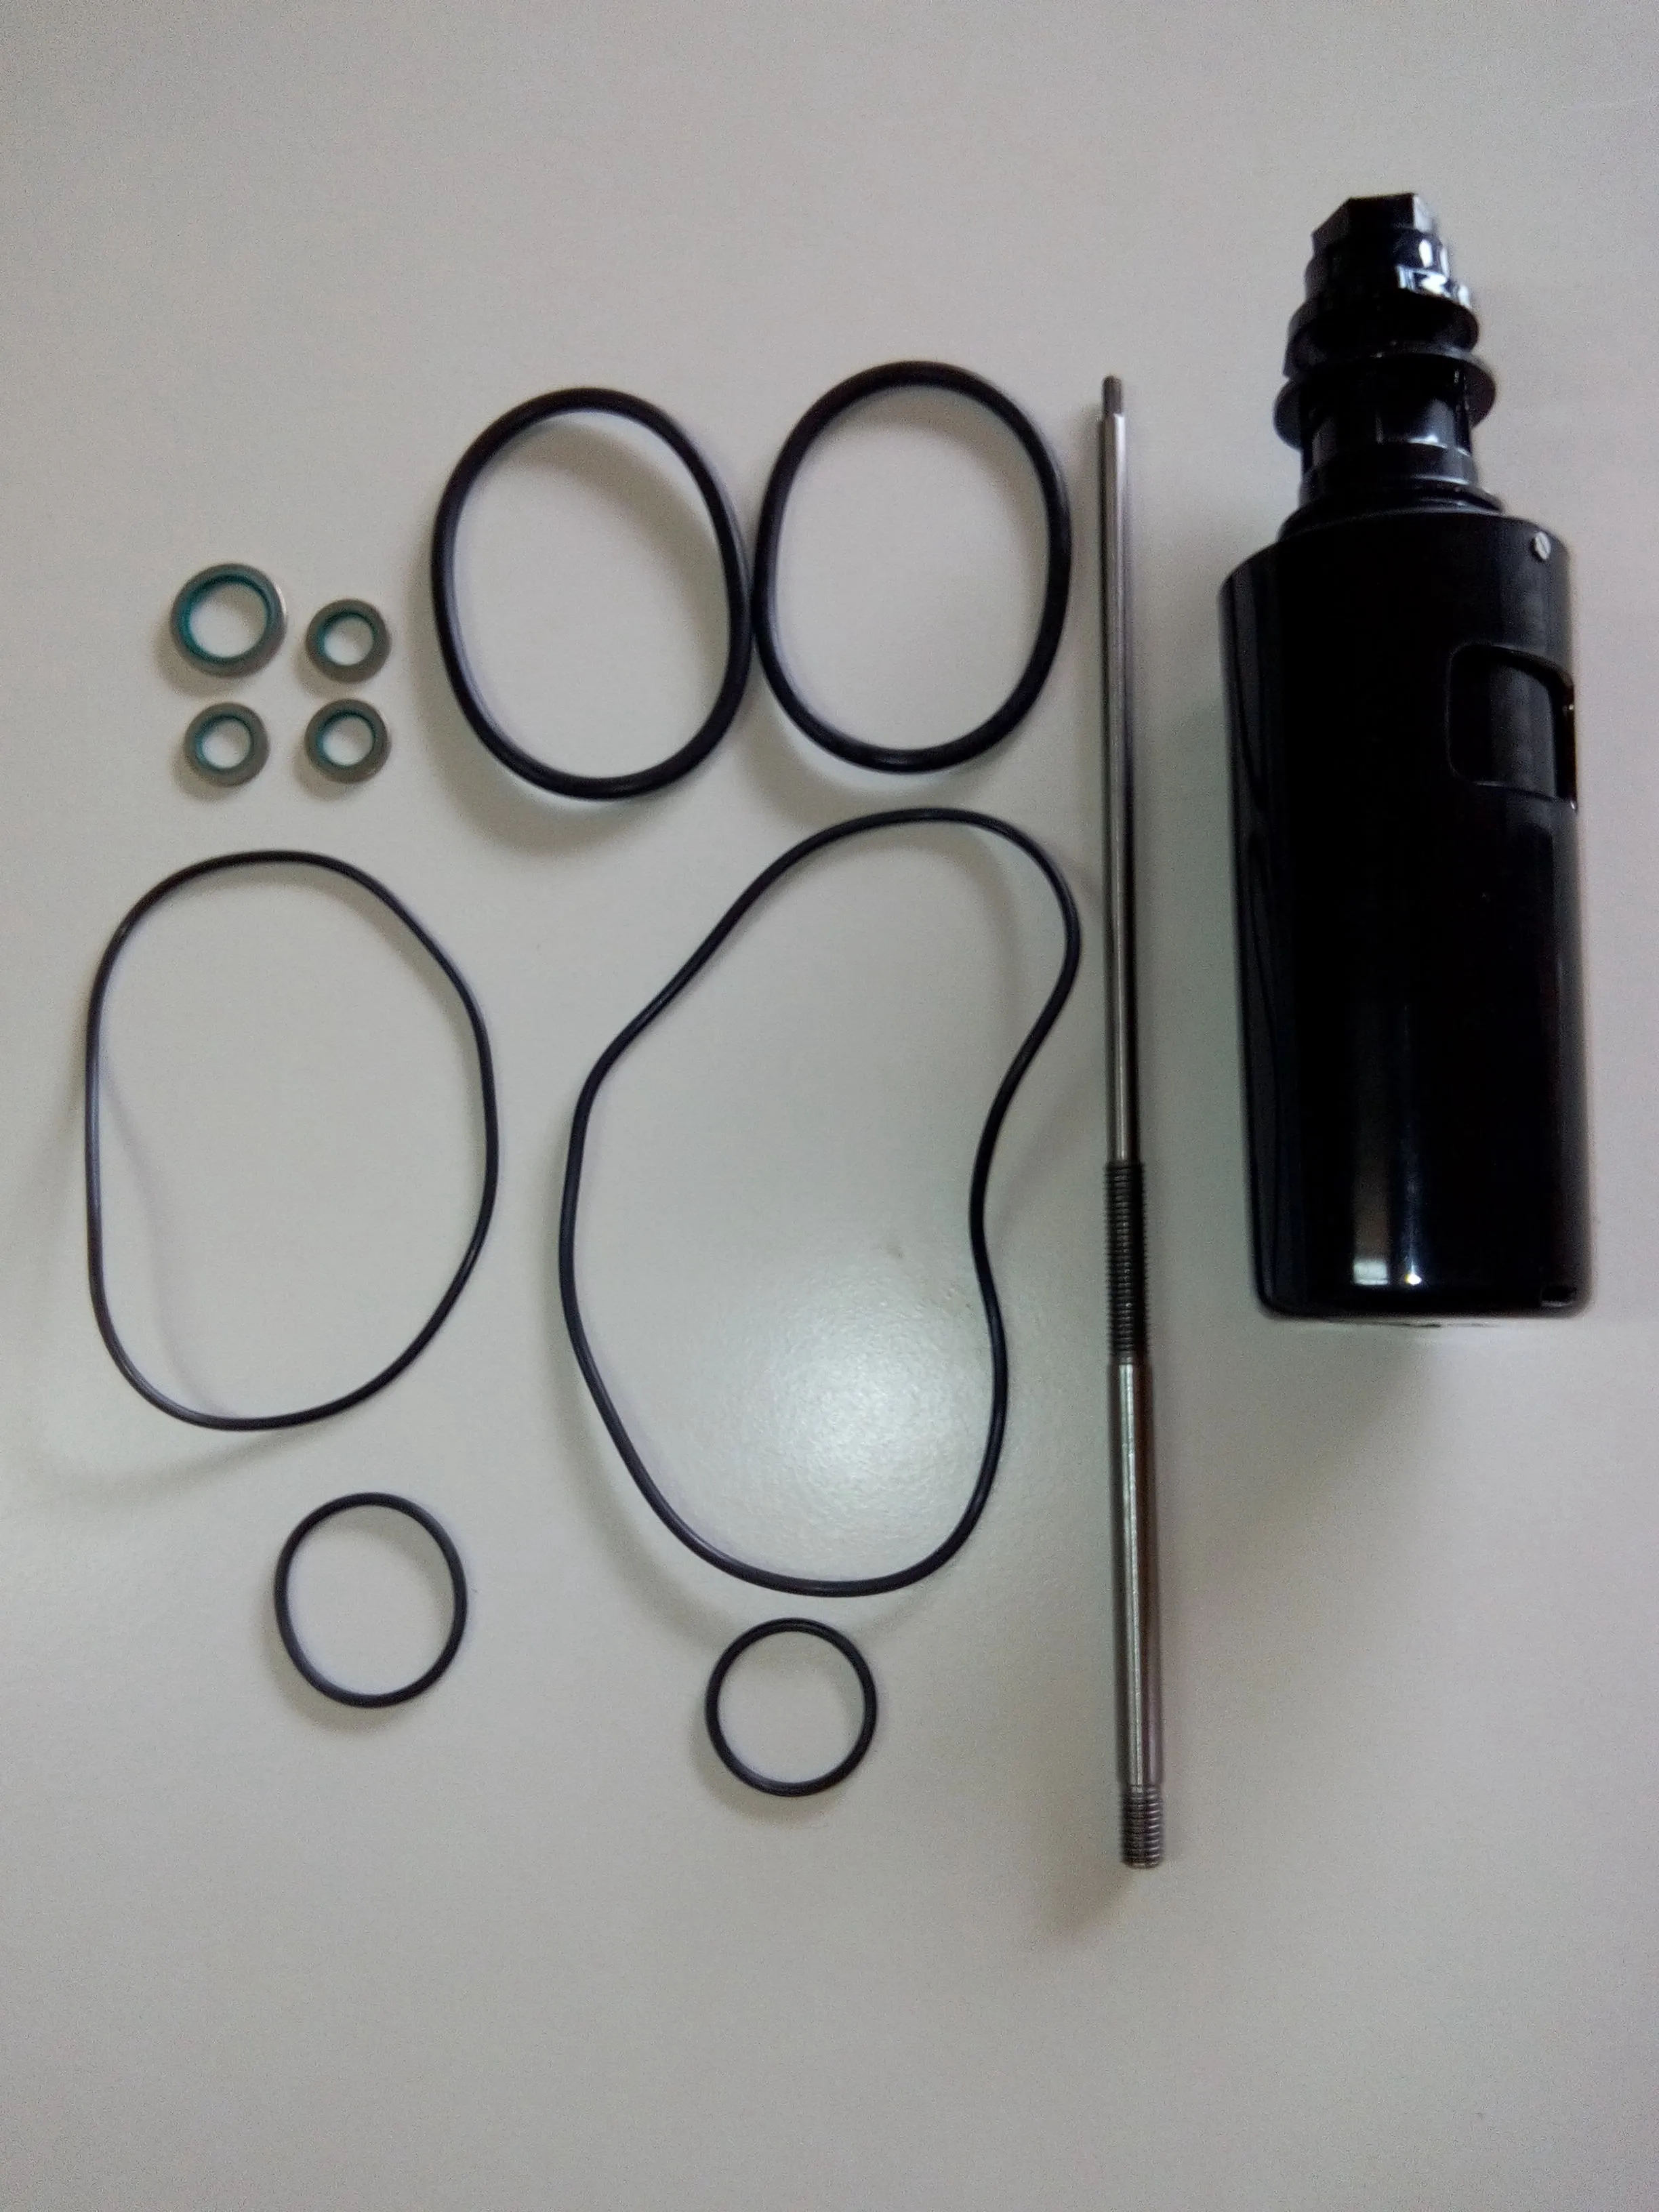 KITPR2312 Spare parts kit for 2901.0845.00 image 0